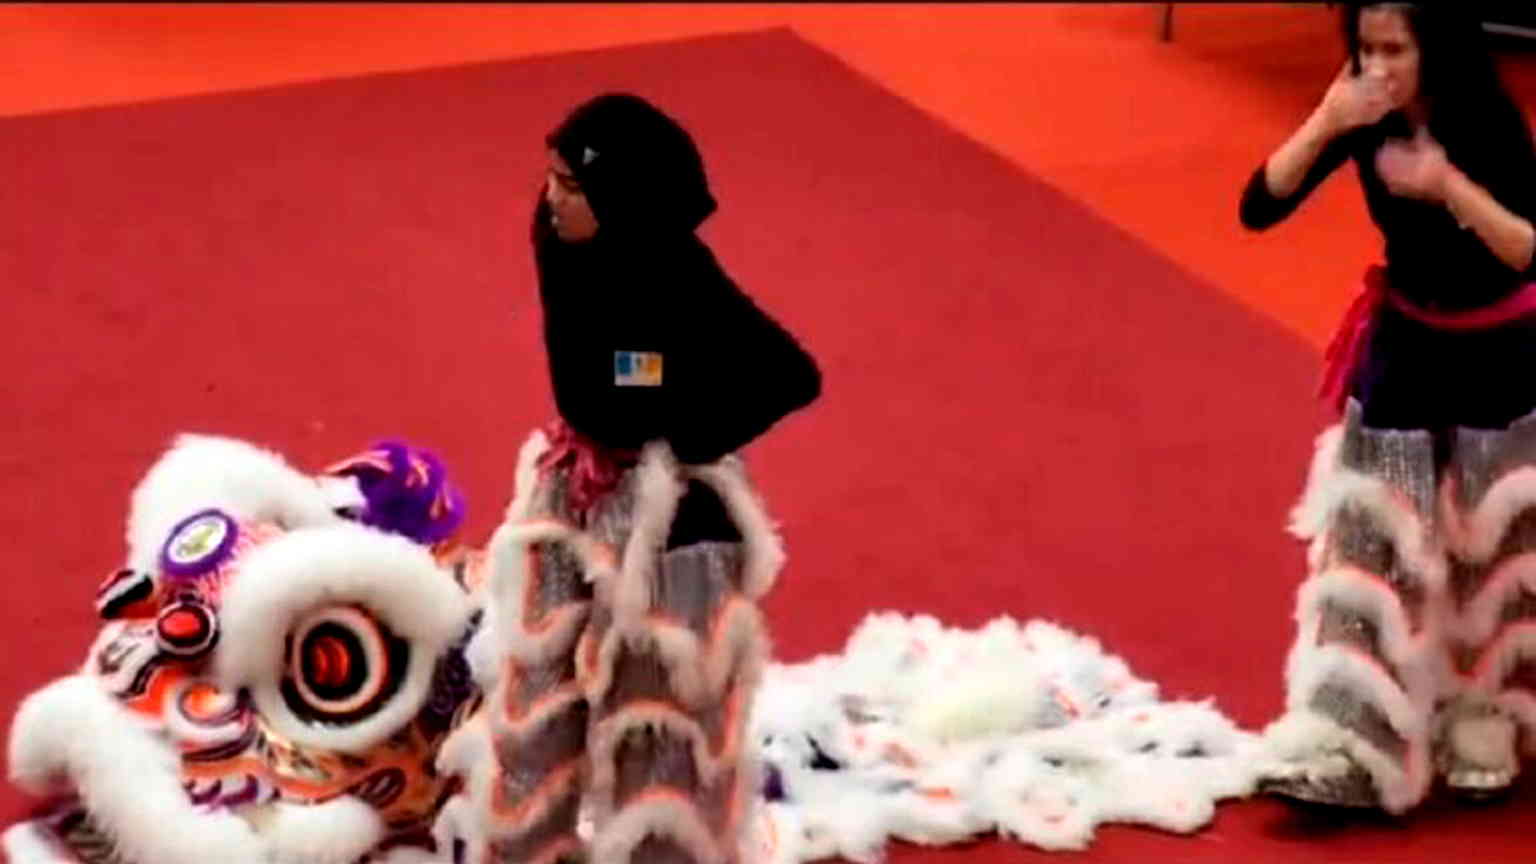 Video: Malaysian dancer with hijab earns roaring applause for captivating lion dance performance